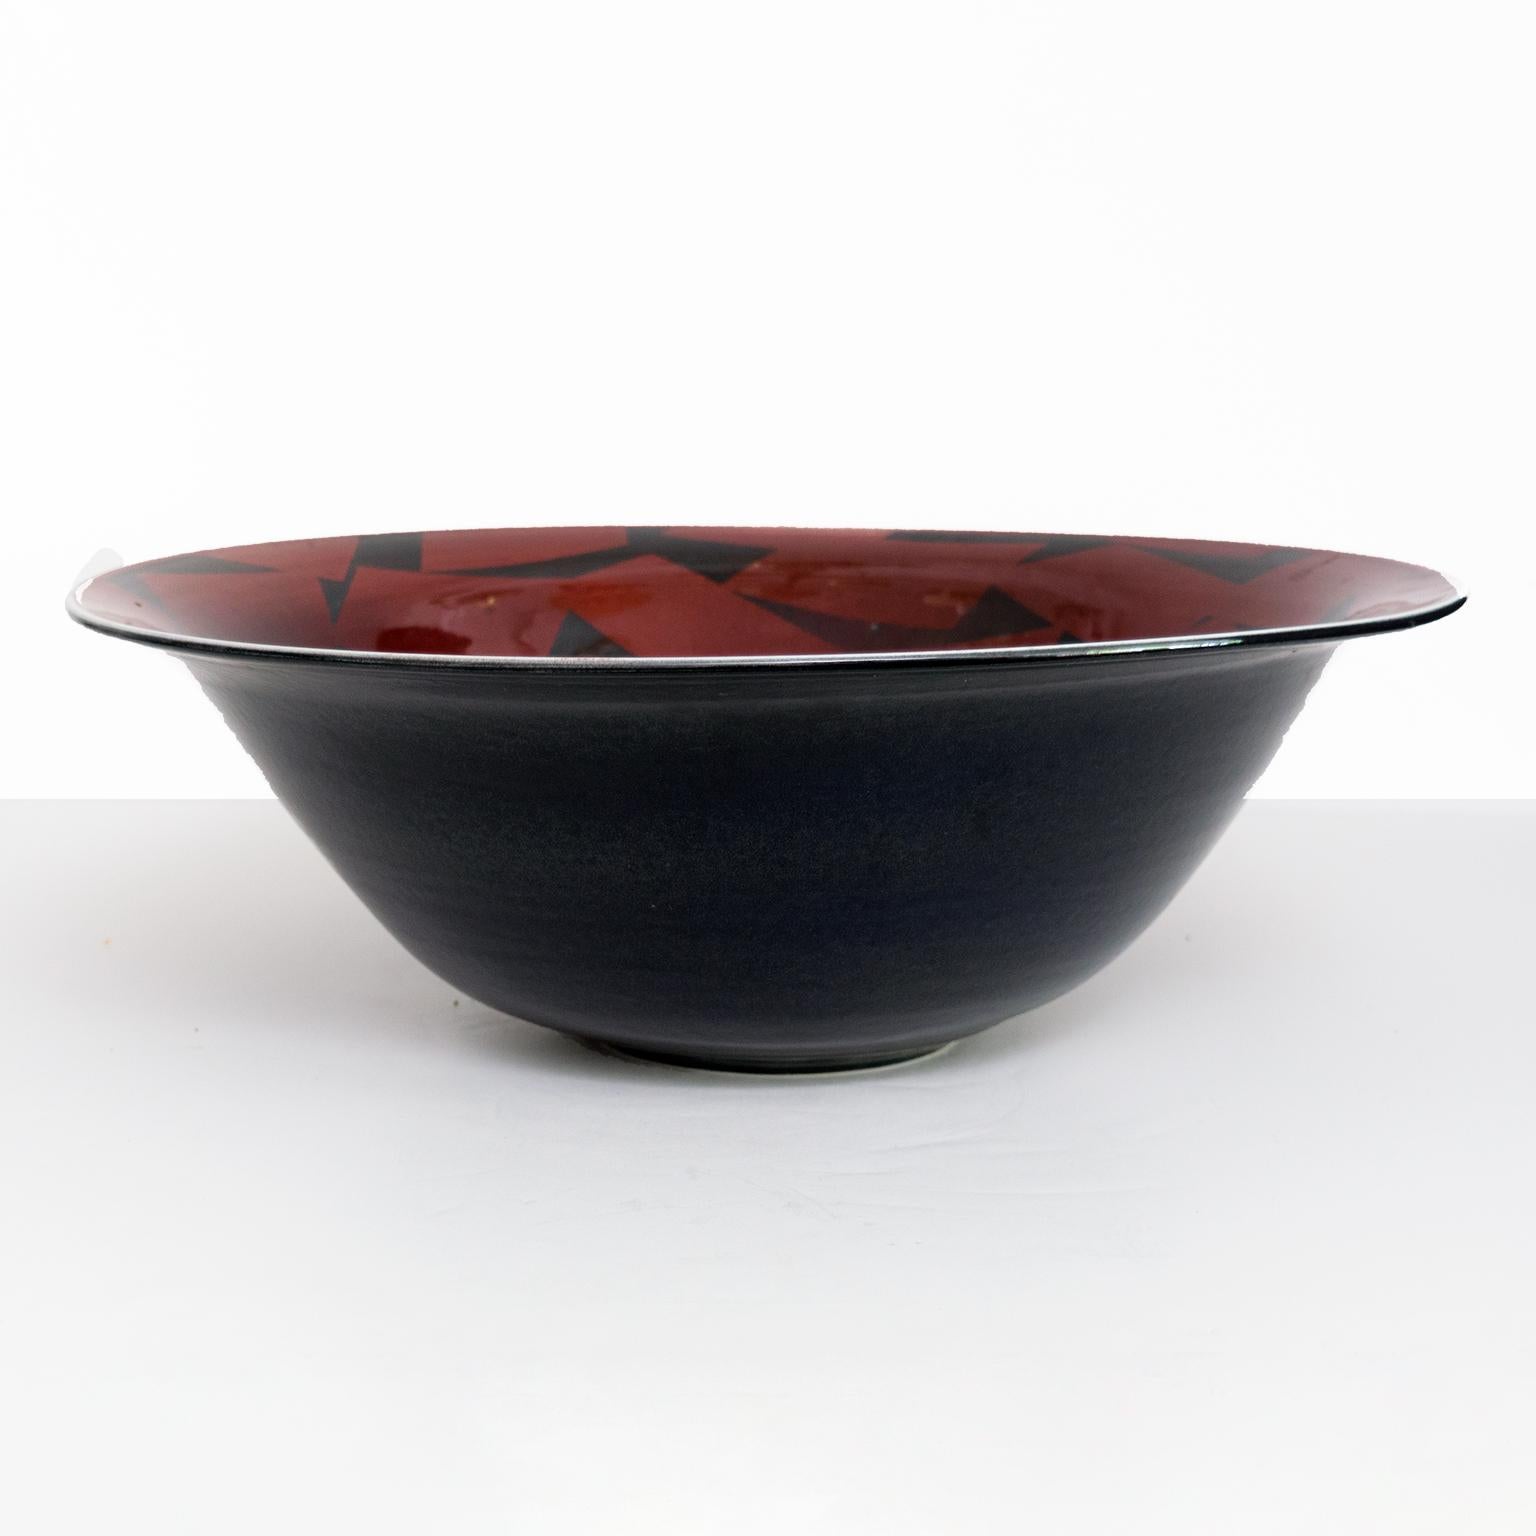 Large Inger Persson porcelain unique Rorstrand studio bowl outer glazed in black and interior in a deep red with decor of angular shapes in black, Signed on bottom and dated 1988. Scandinavian Modern

Measures: Diameter 18.25”, height: 6.5.